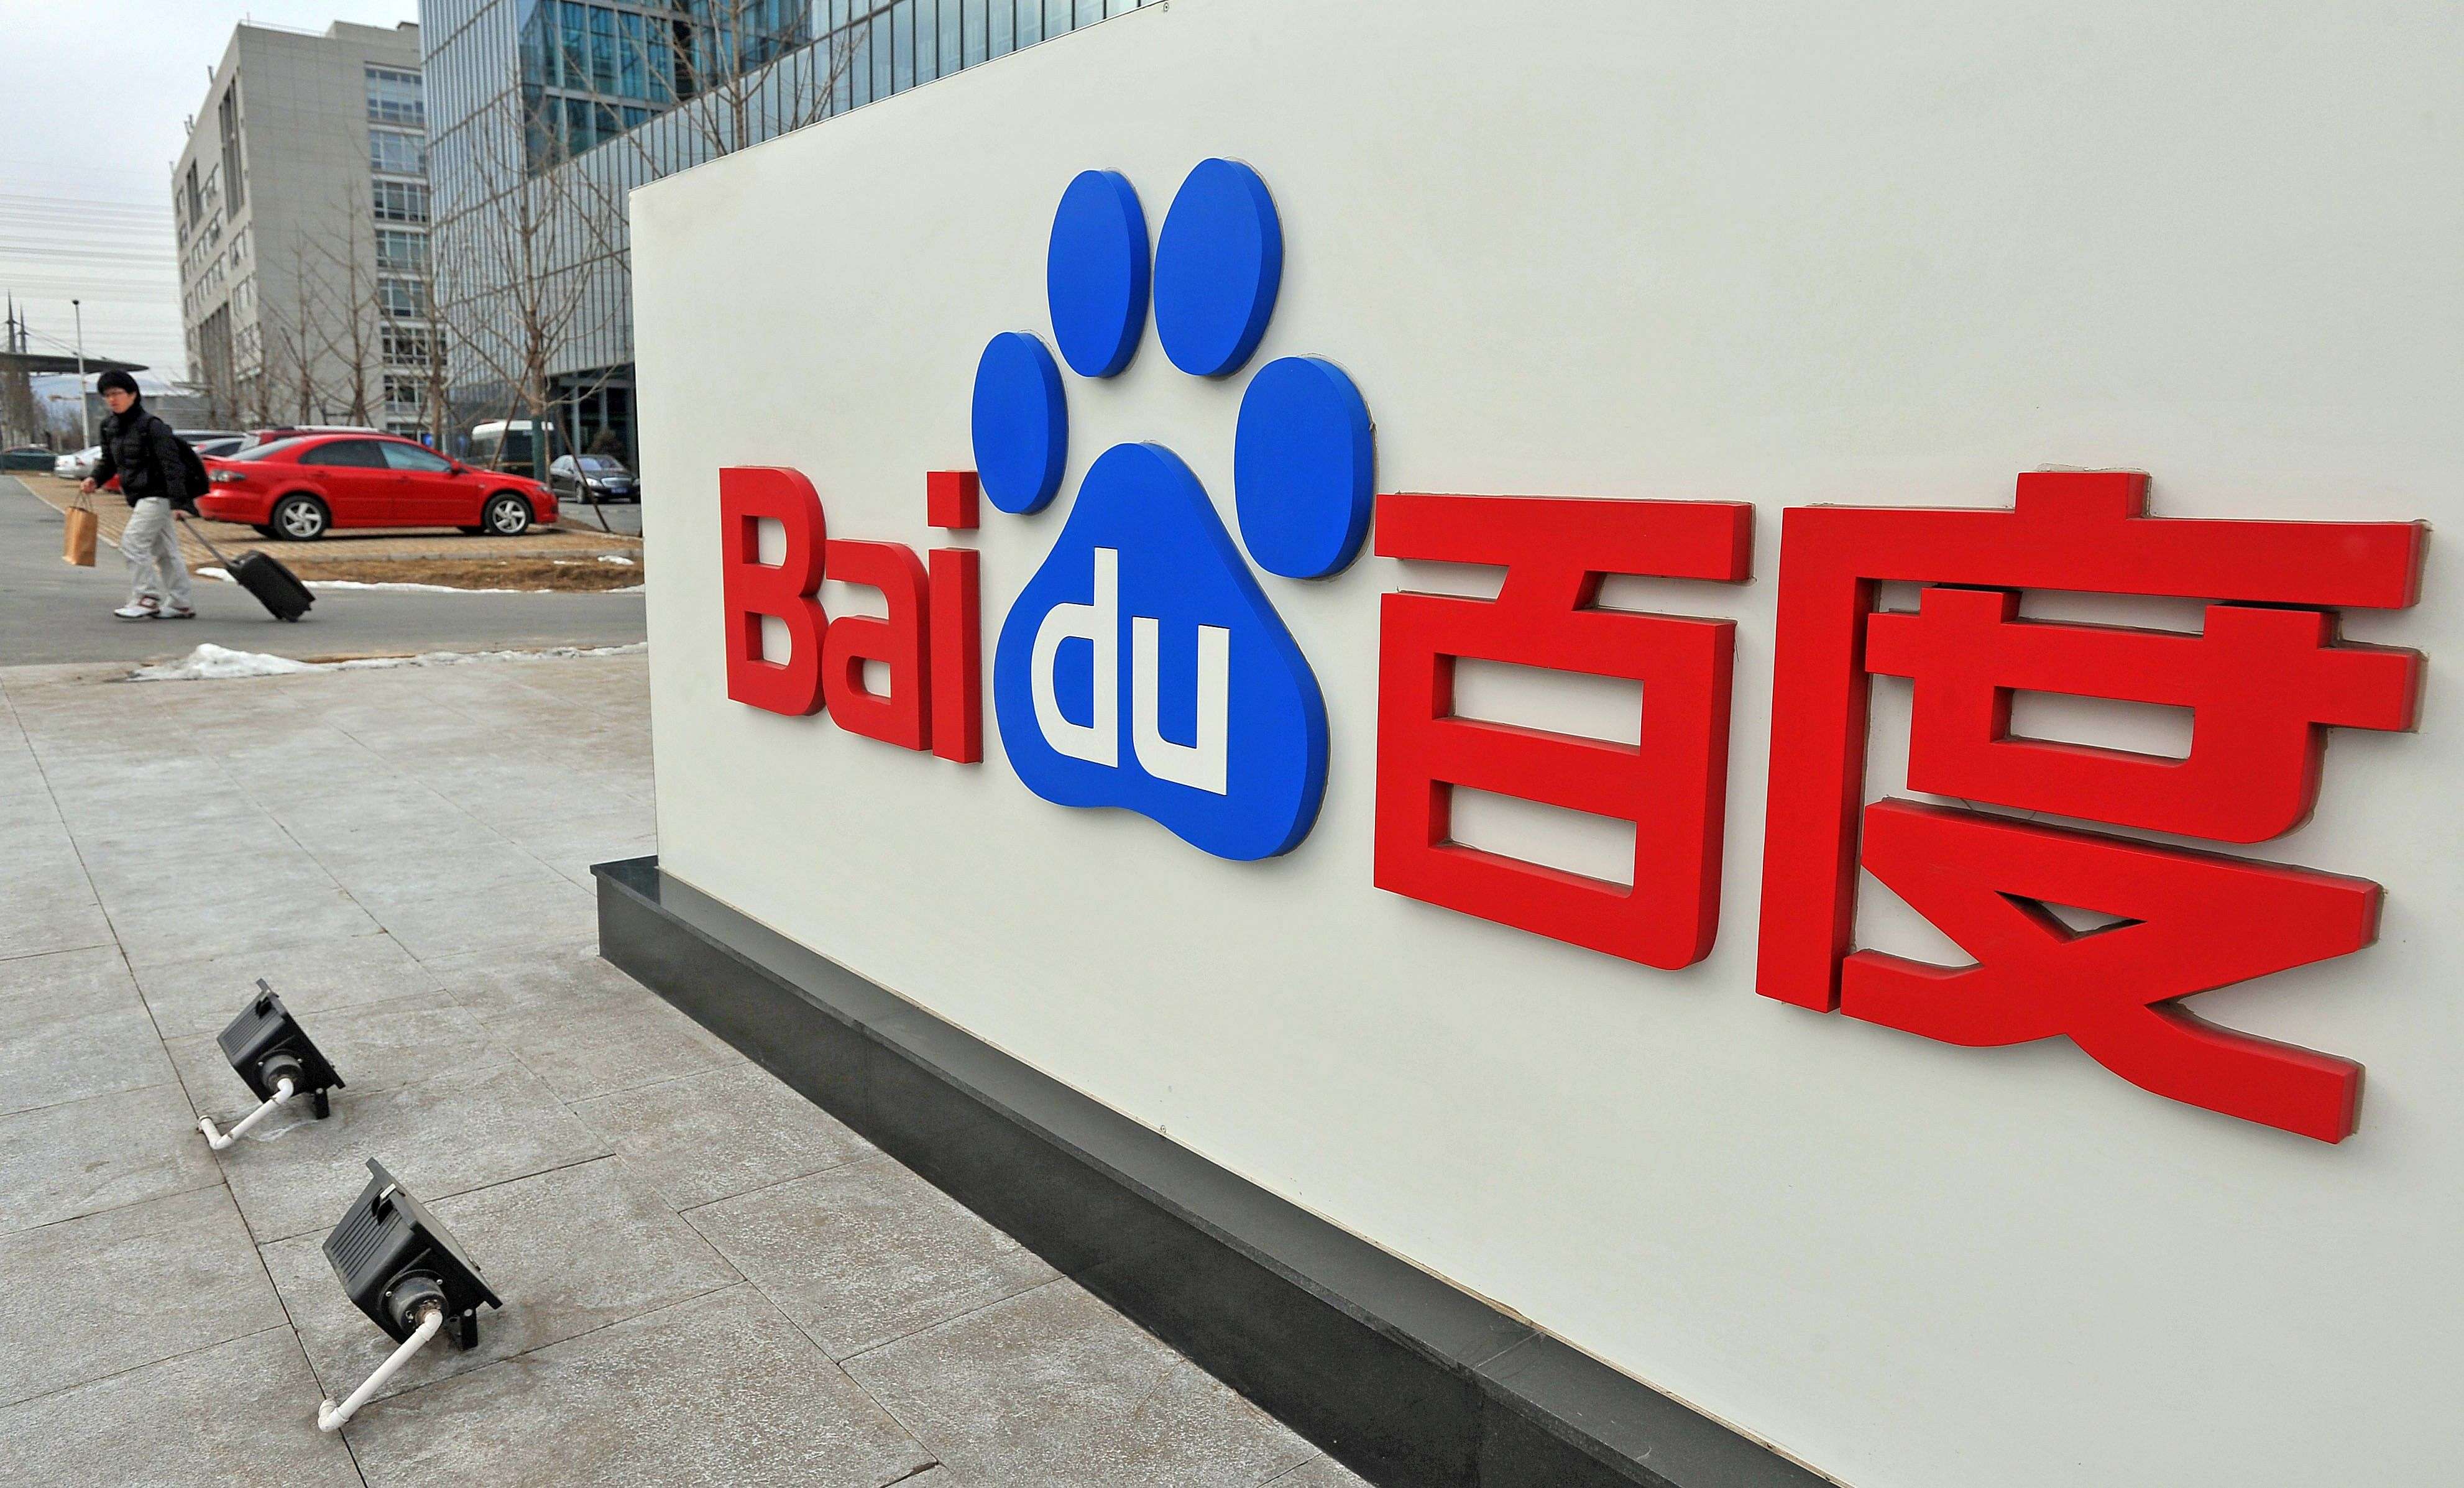 The head office in Beijing of Baidu, China’s biggest search engine. The acronym of the moment, as China encourages its entrepreneurs to build internet businesses to rival those in Silicon valley, is “Bat”: Baidu, Alibaba (China’s answer to Amazon) and Tencent (the nearest thing to Facebook). Photo: AFP